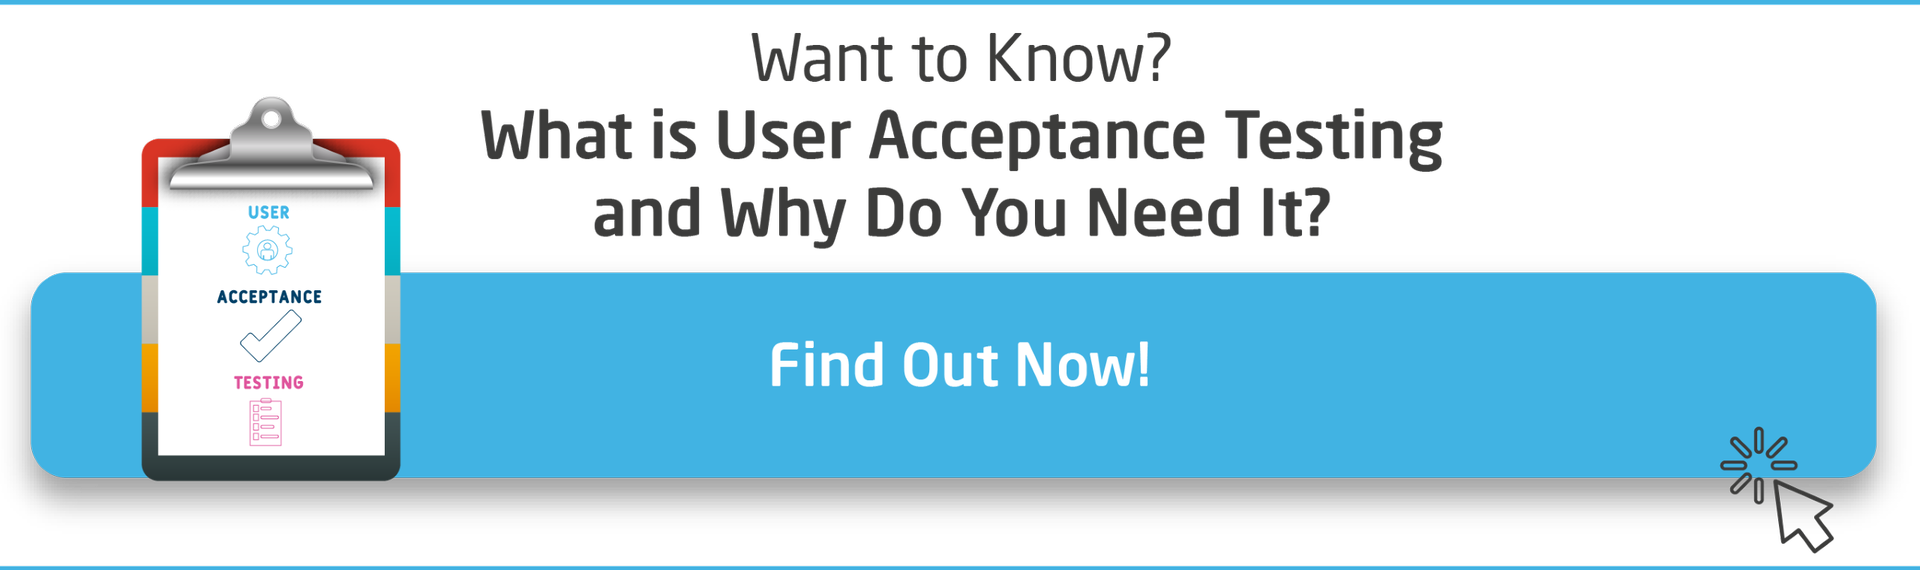 CTA-What-is User-Acceptance-Testing-and-Why-Do-You-Need-it